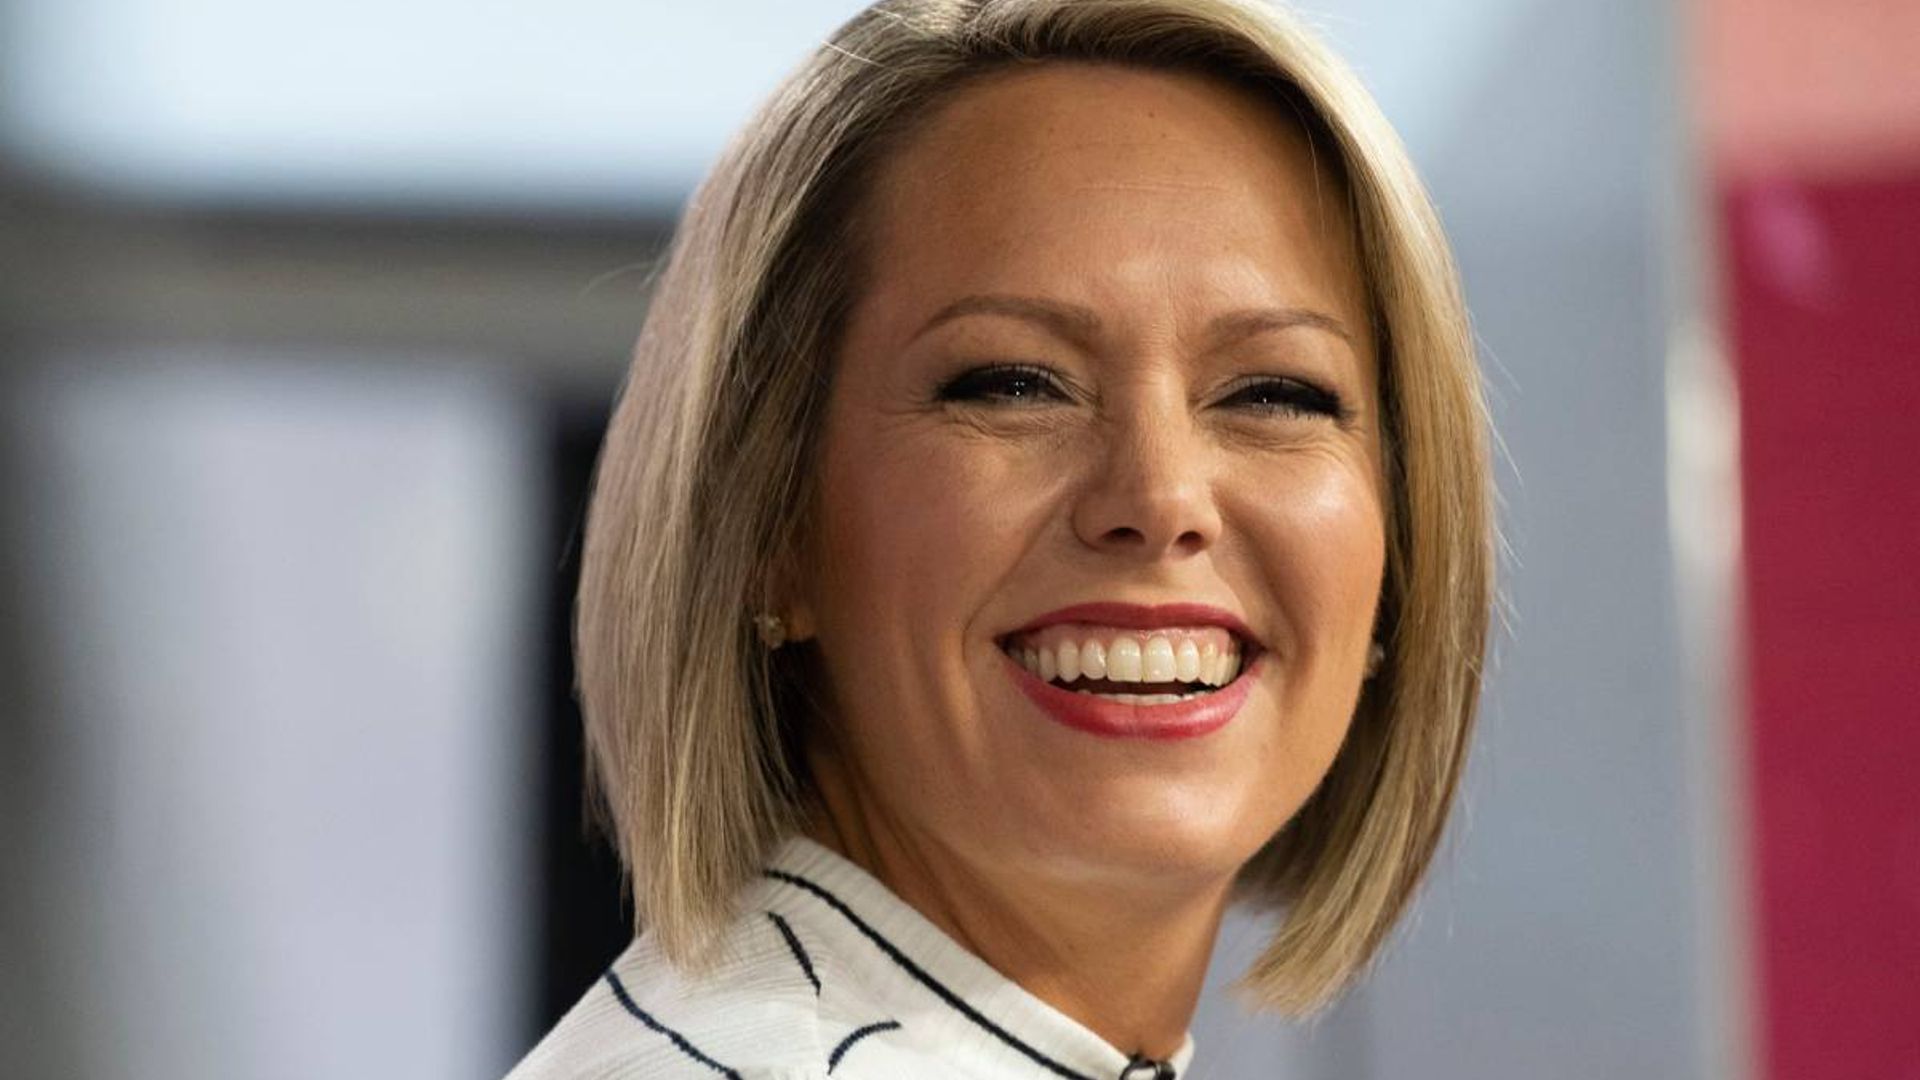 Today's Dylan Dreyer's real reason for missing show revealed - as she